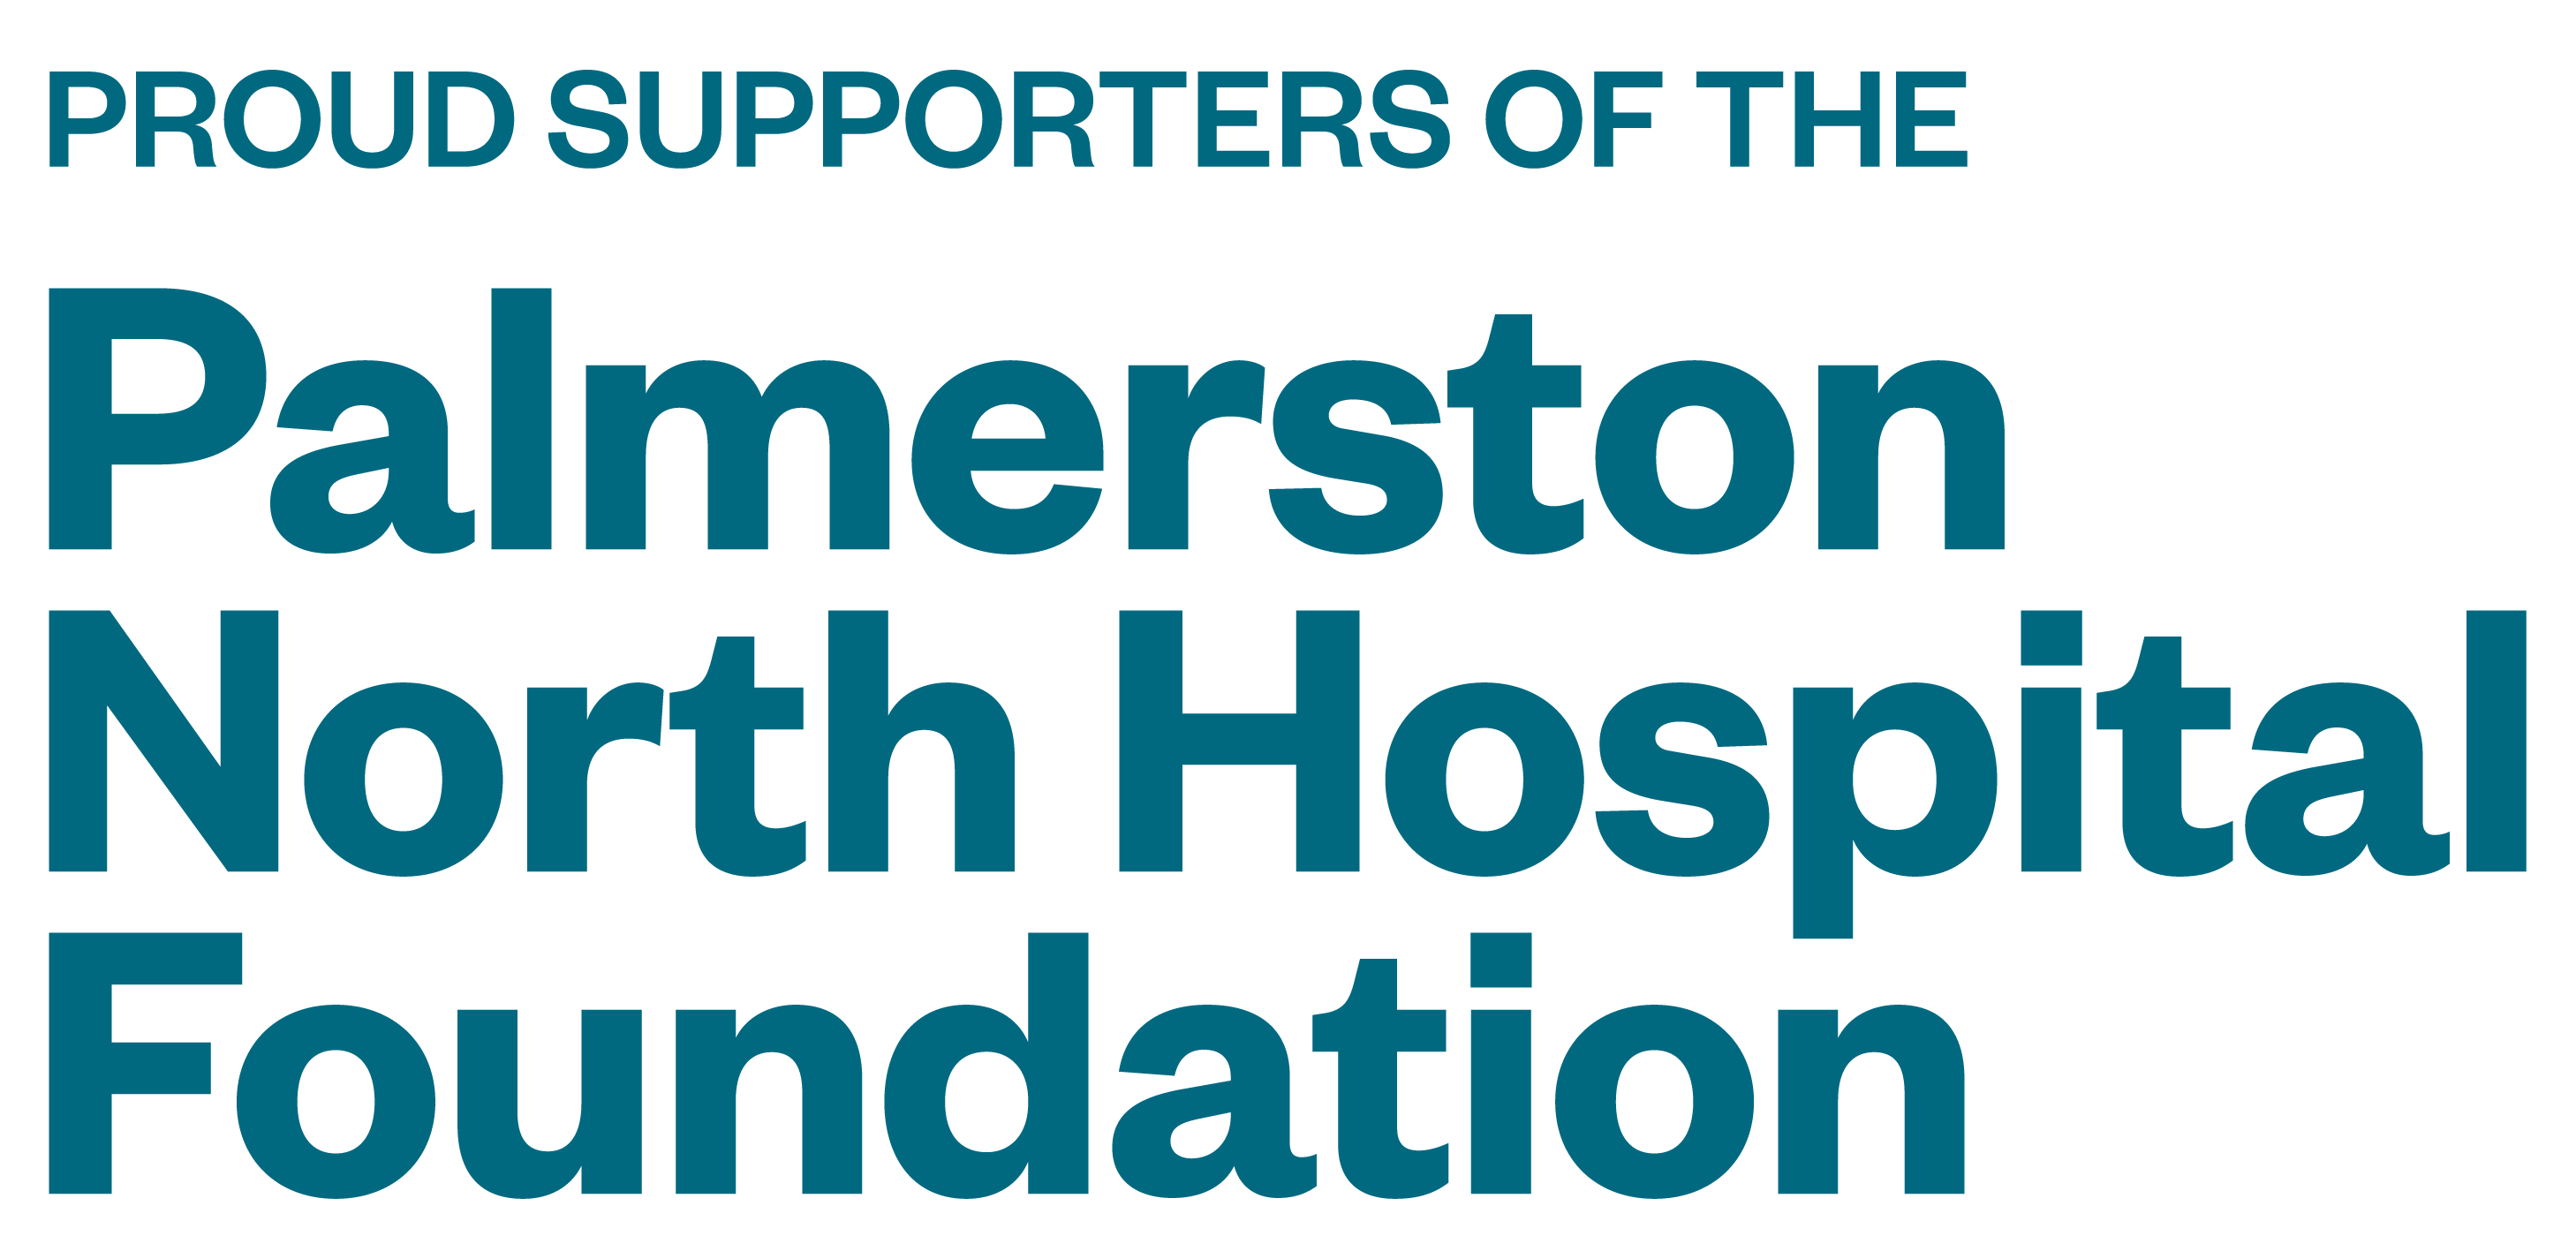 Proud sponsors of the Palmerston North Hospital Foundation